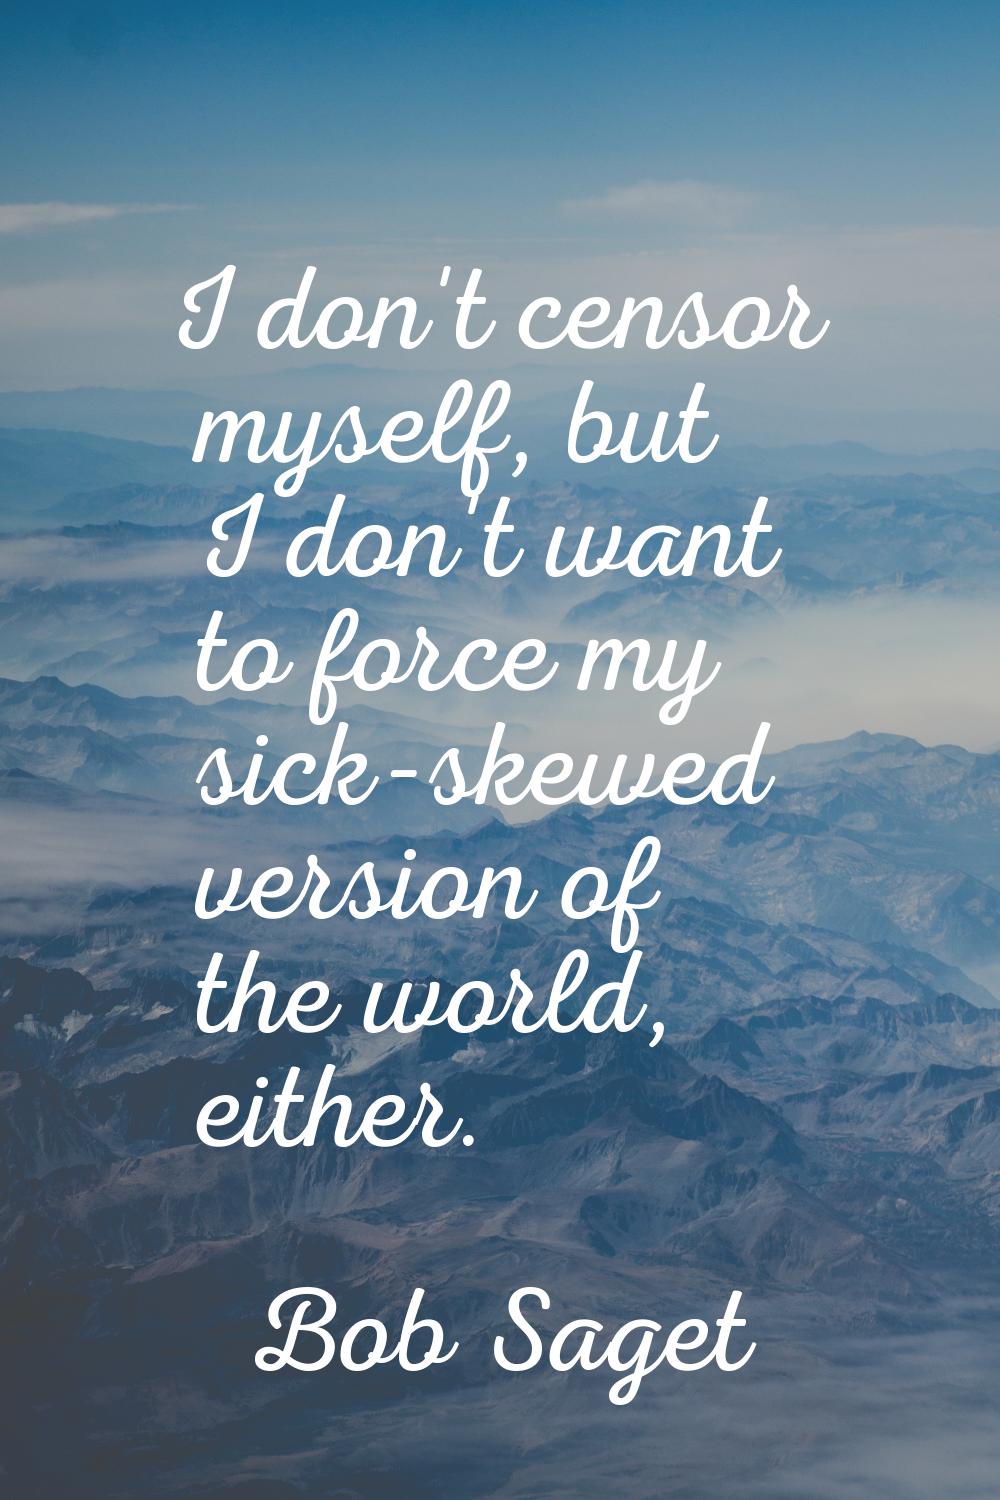 I don't censor myself, but I don't want to force my sick-skewed version of the world, either.